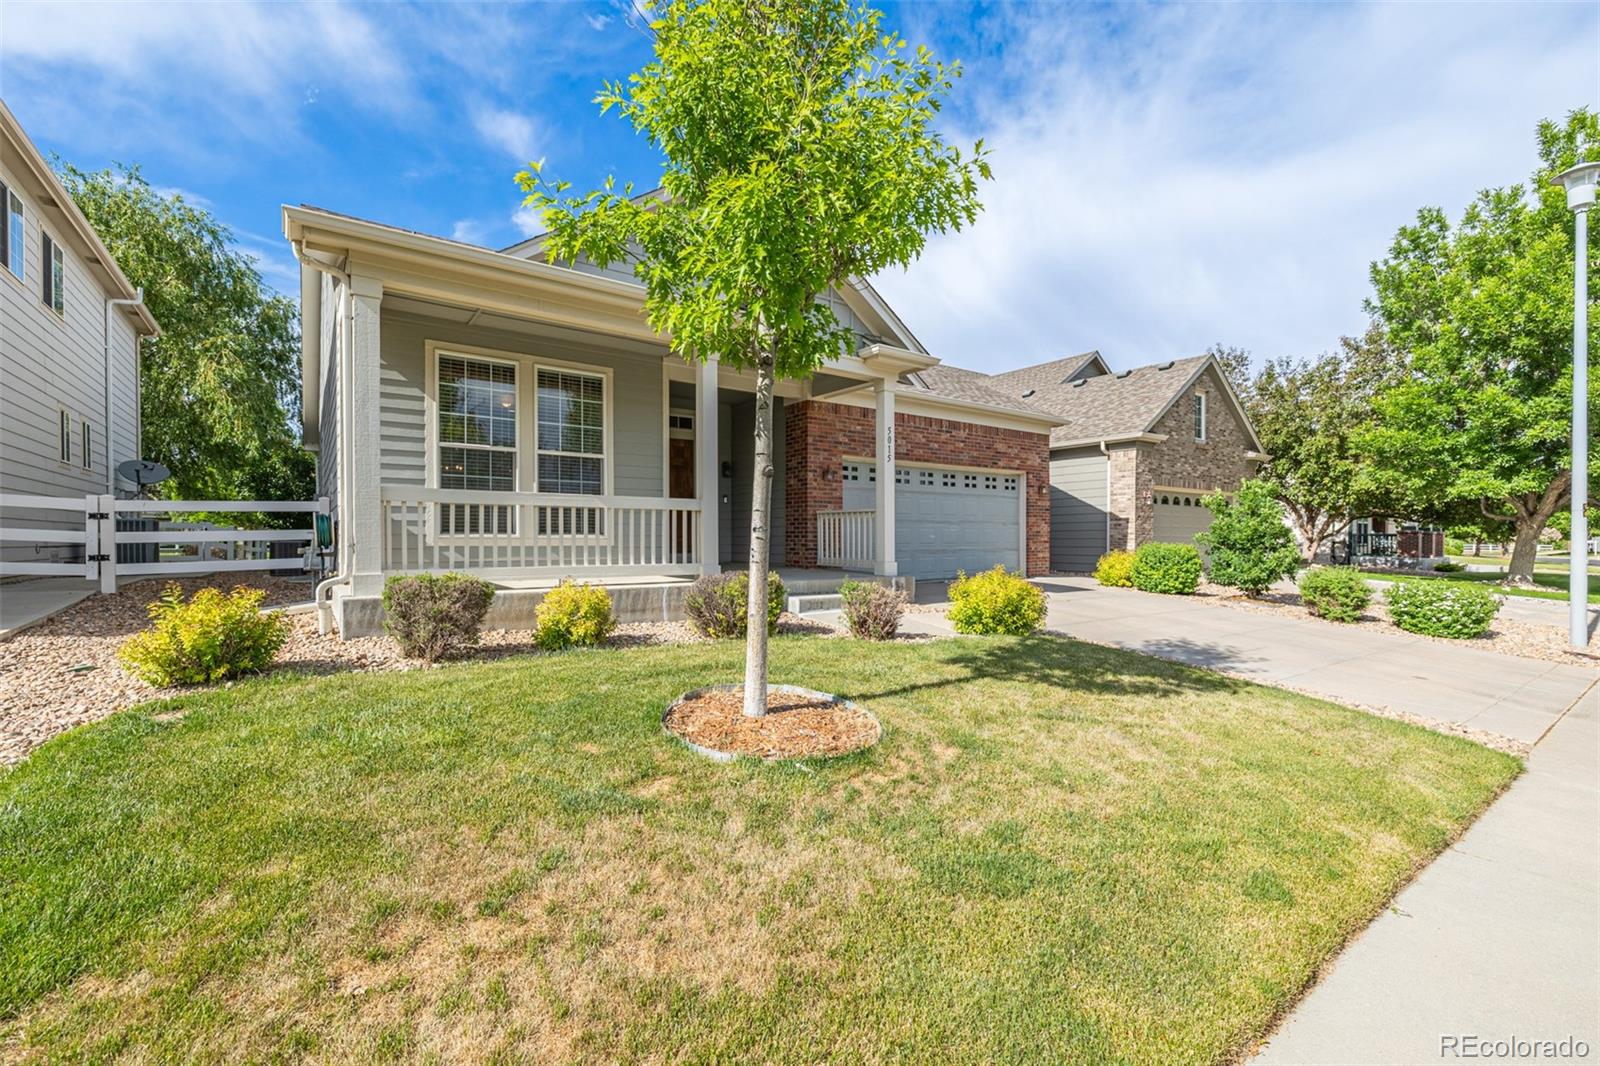 Report Image for 5015 W 116th Way,Westminster, Colorado